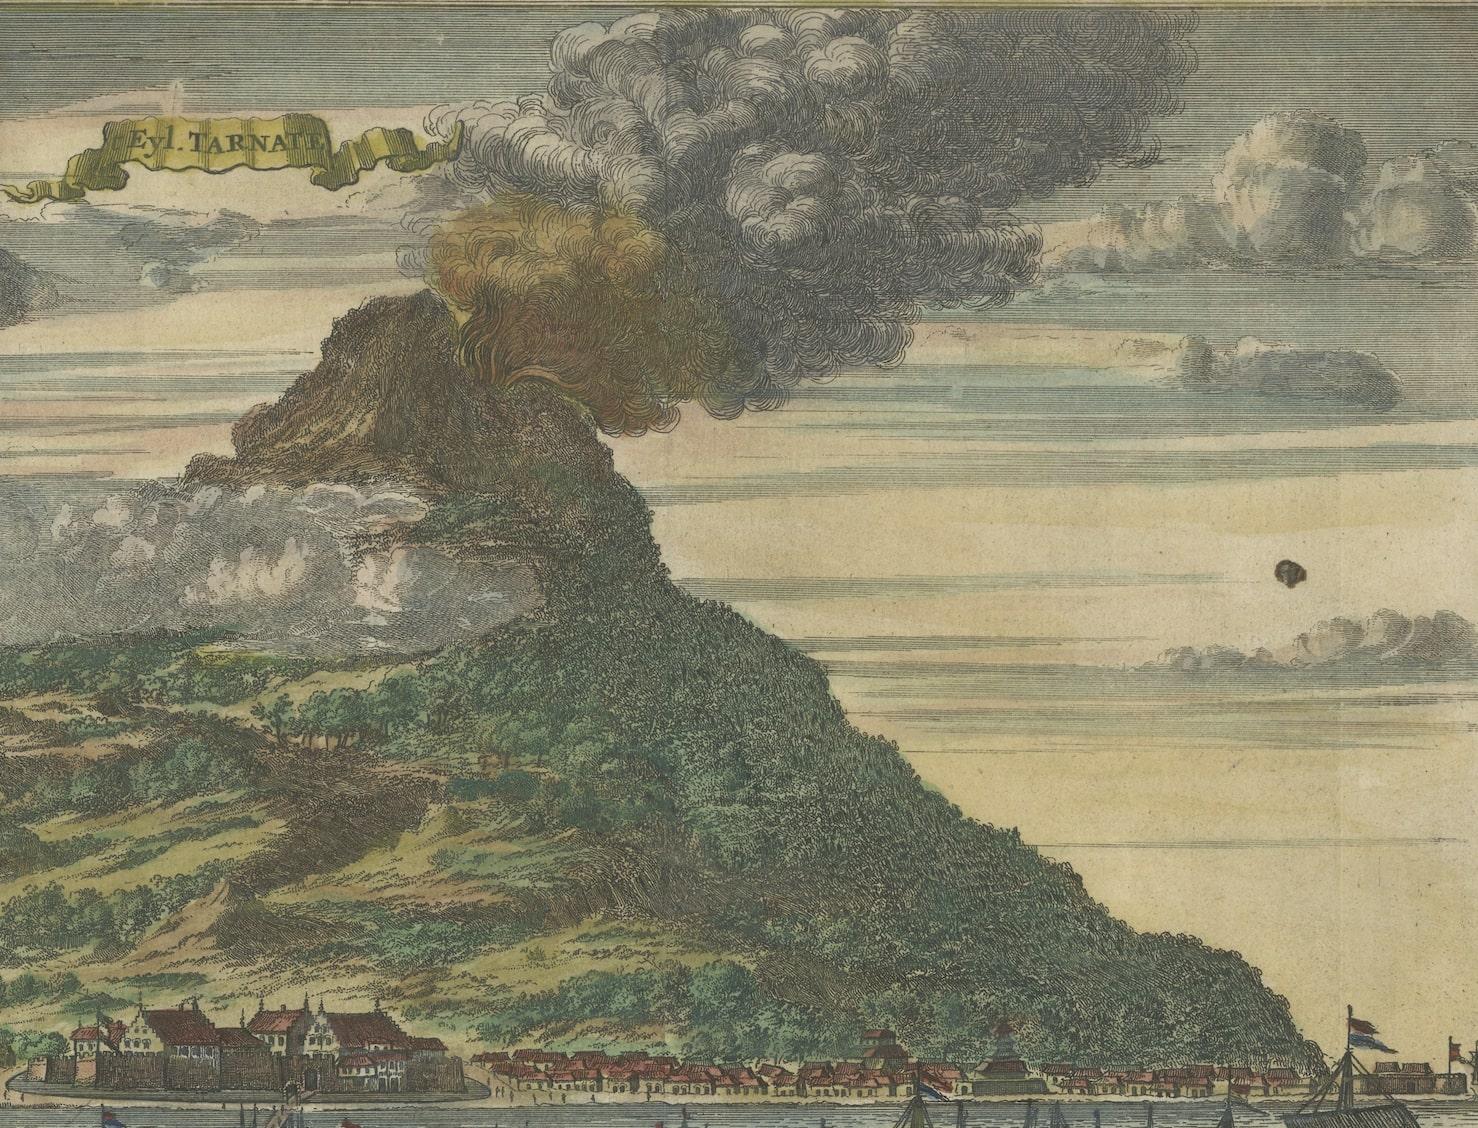 Johannes Kip's hand-colored antique engraving from 1682 depicts the volcanic island of Ternate, set within the captivating backdrop of the Dutch East Indies. This intricate artwork captures the volcanic landscape of Ternate, renowned for its natural